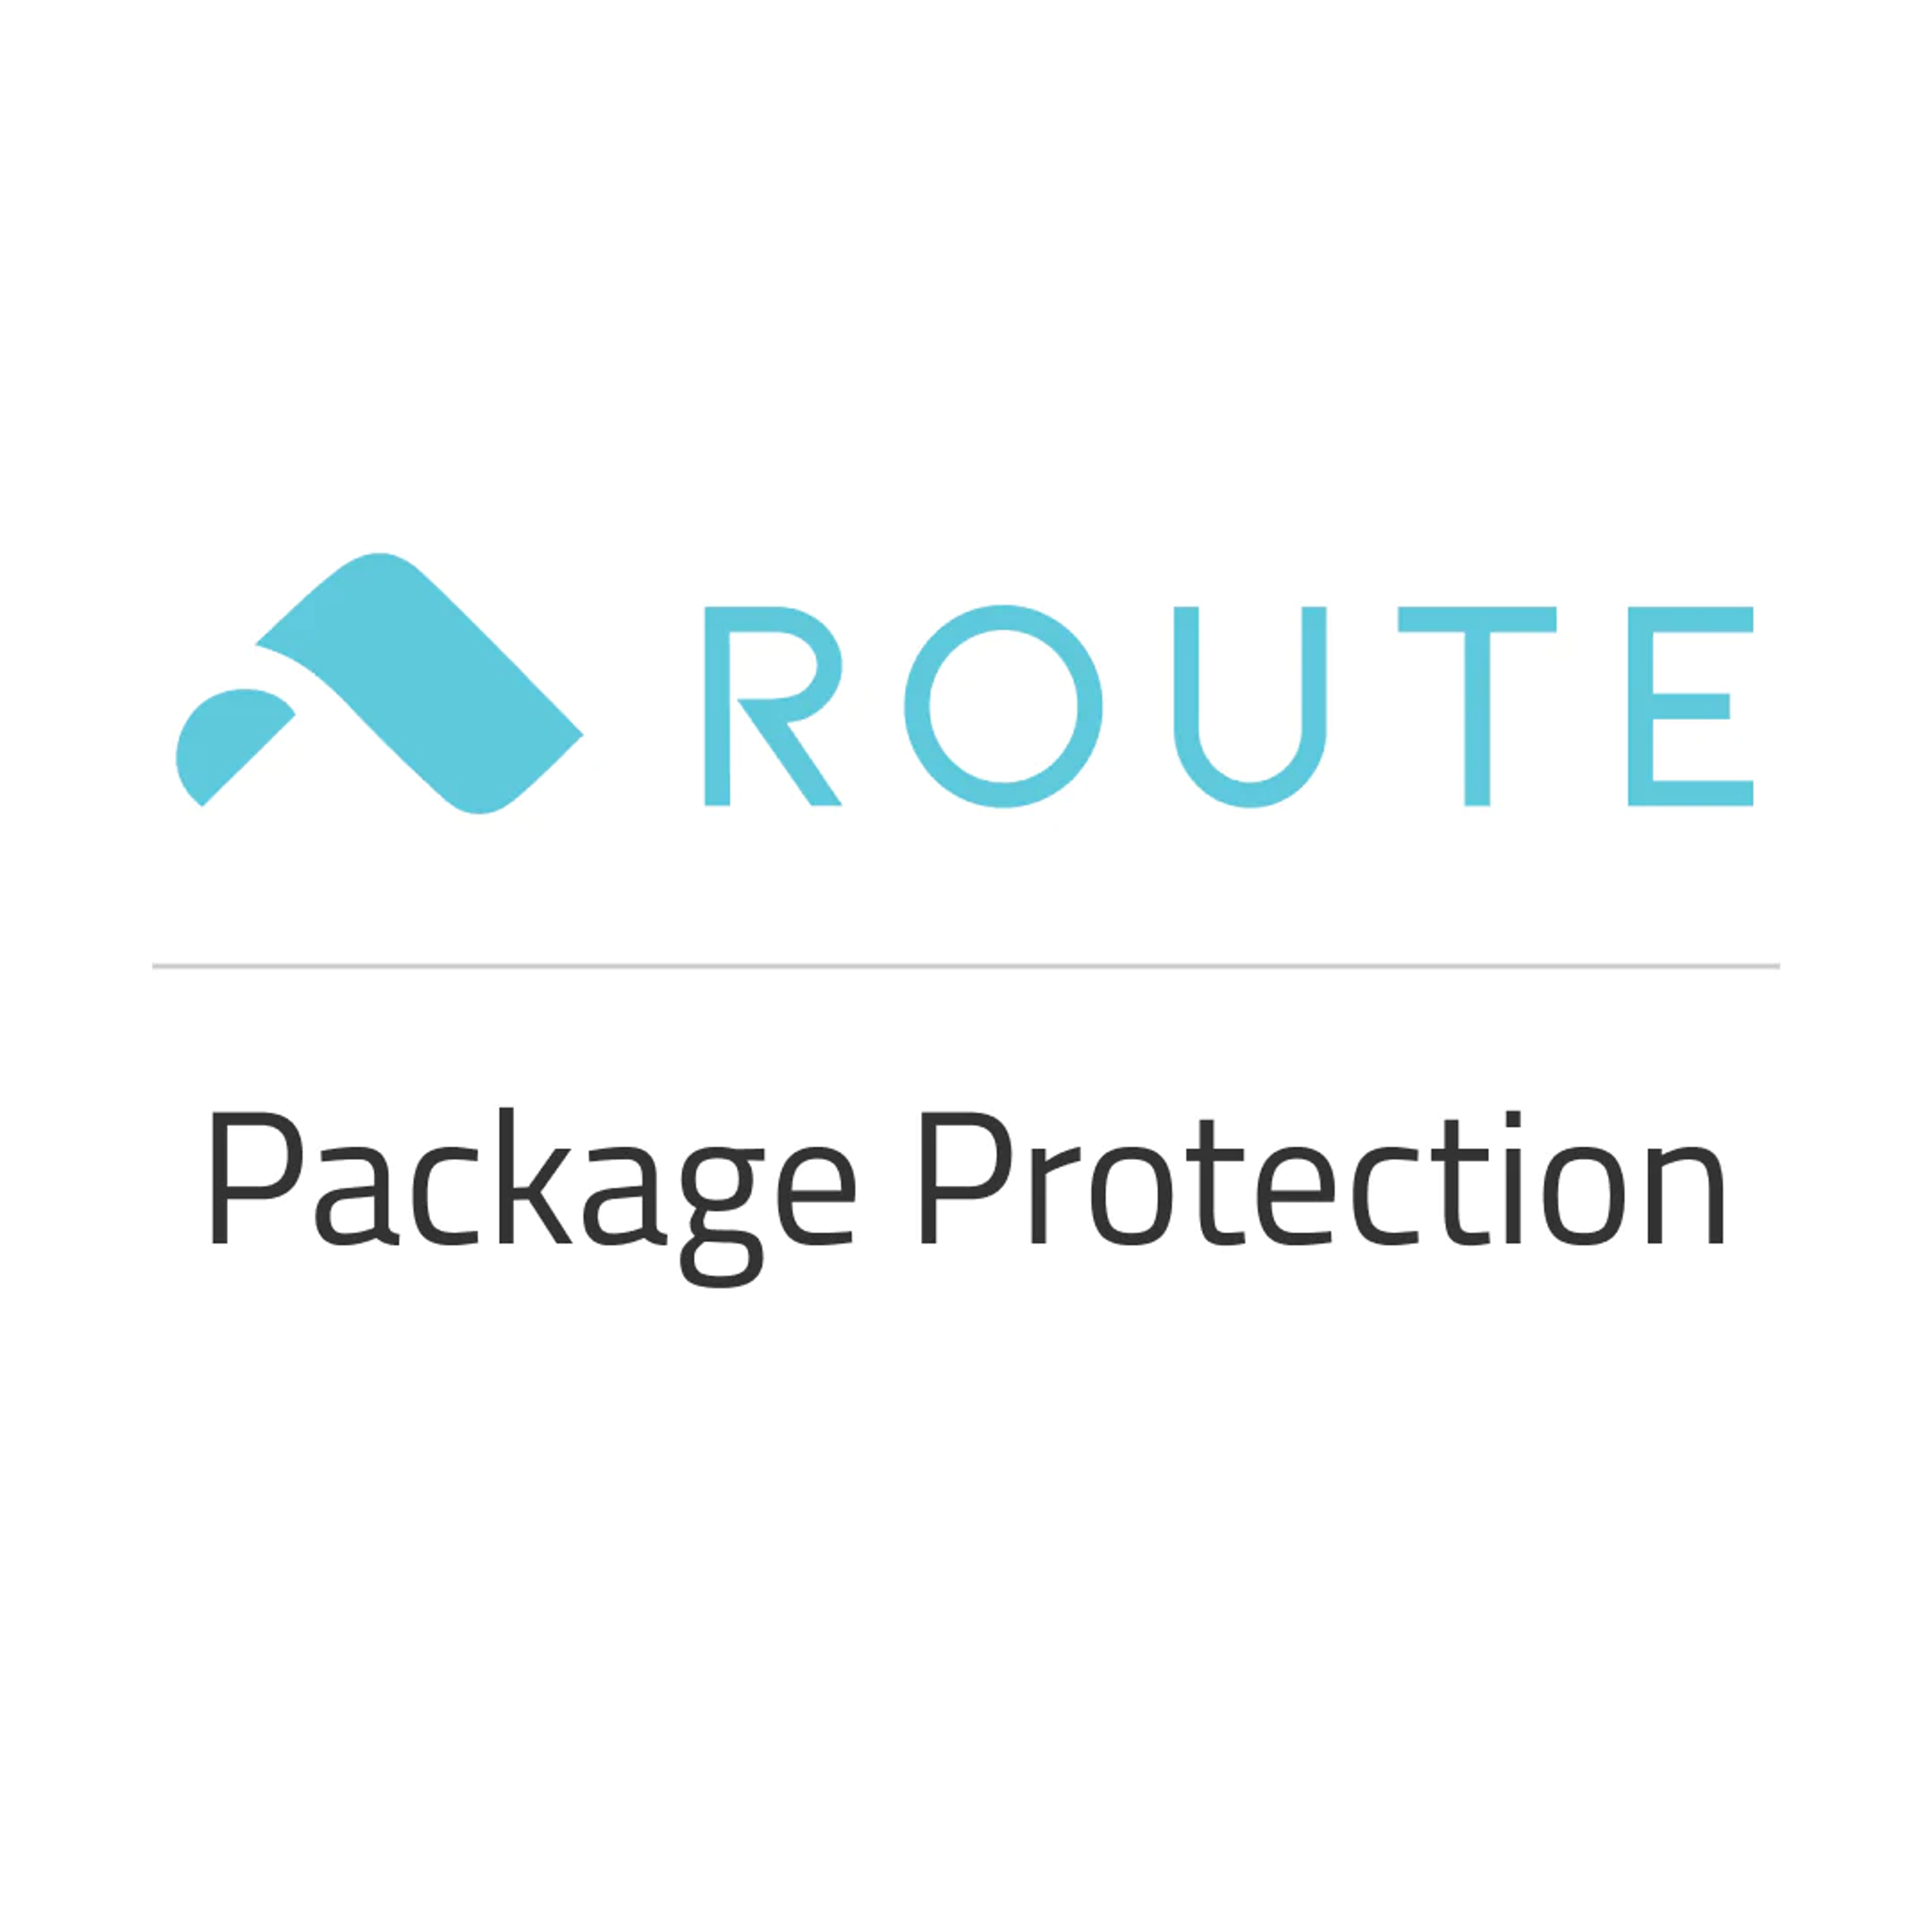 Route Package Protection - $7.95